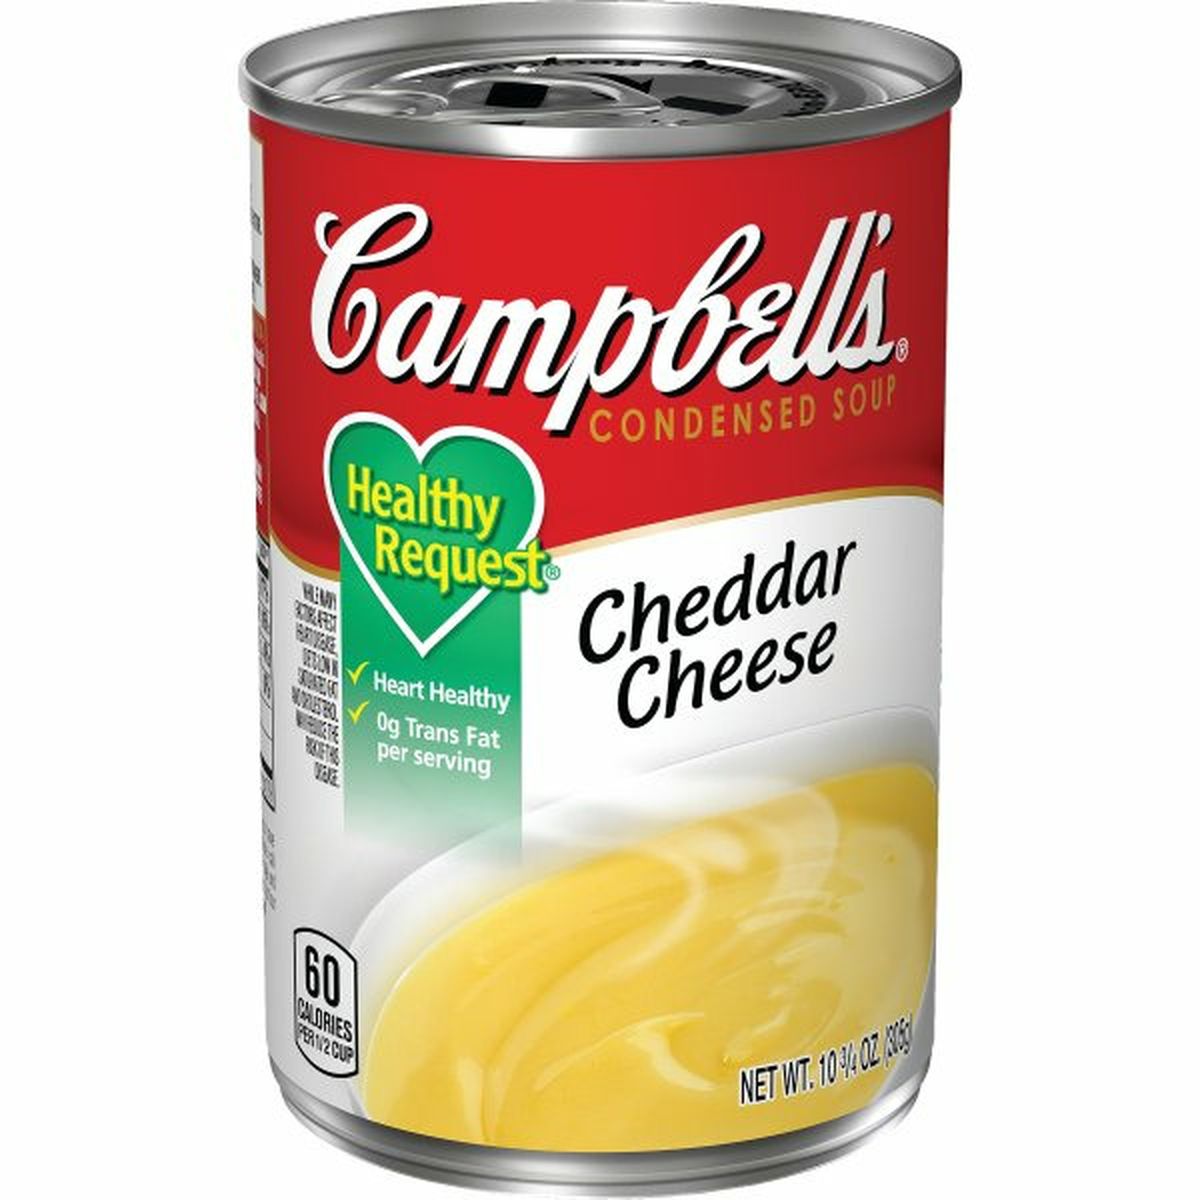 Calories in Campbell'ss Condensed Healthy Request Cheddar Cheese Soup